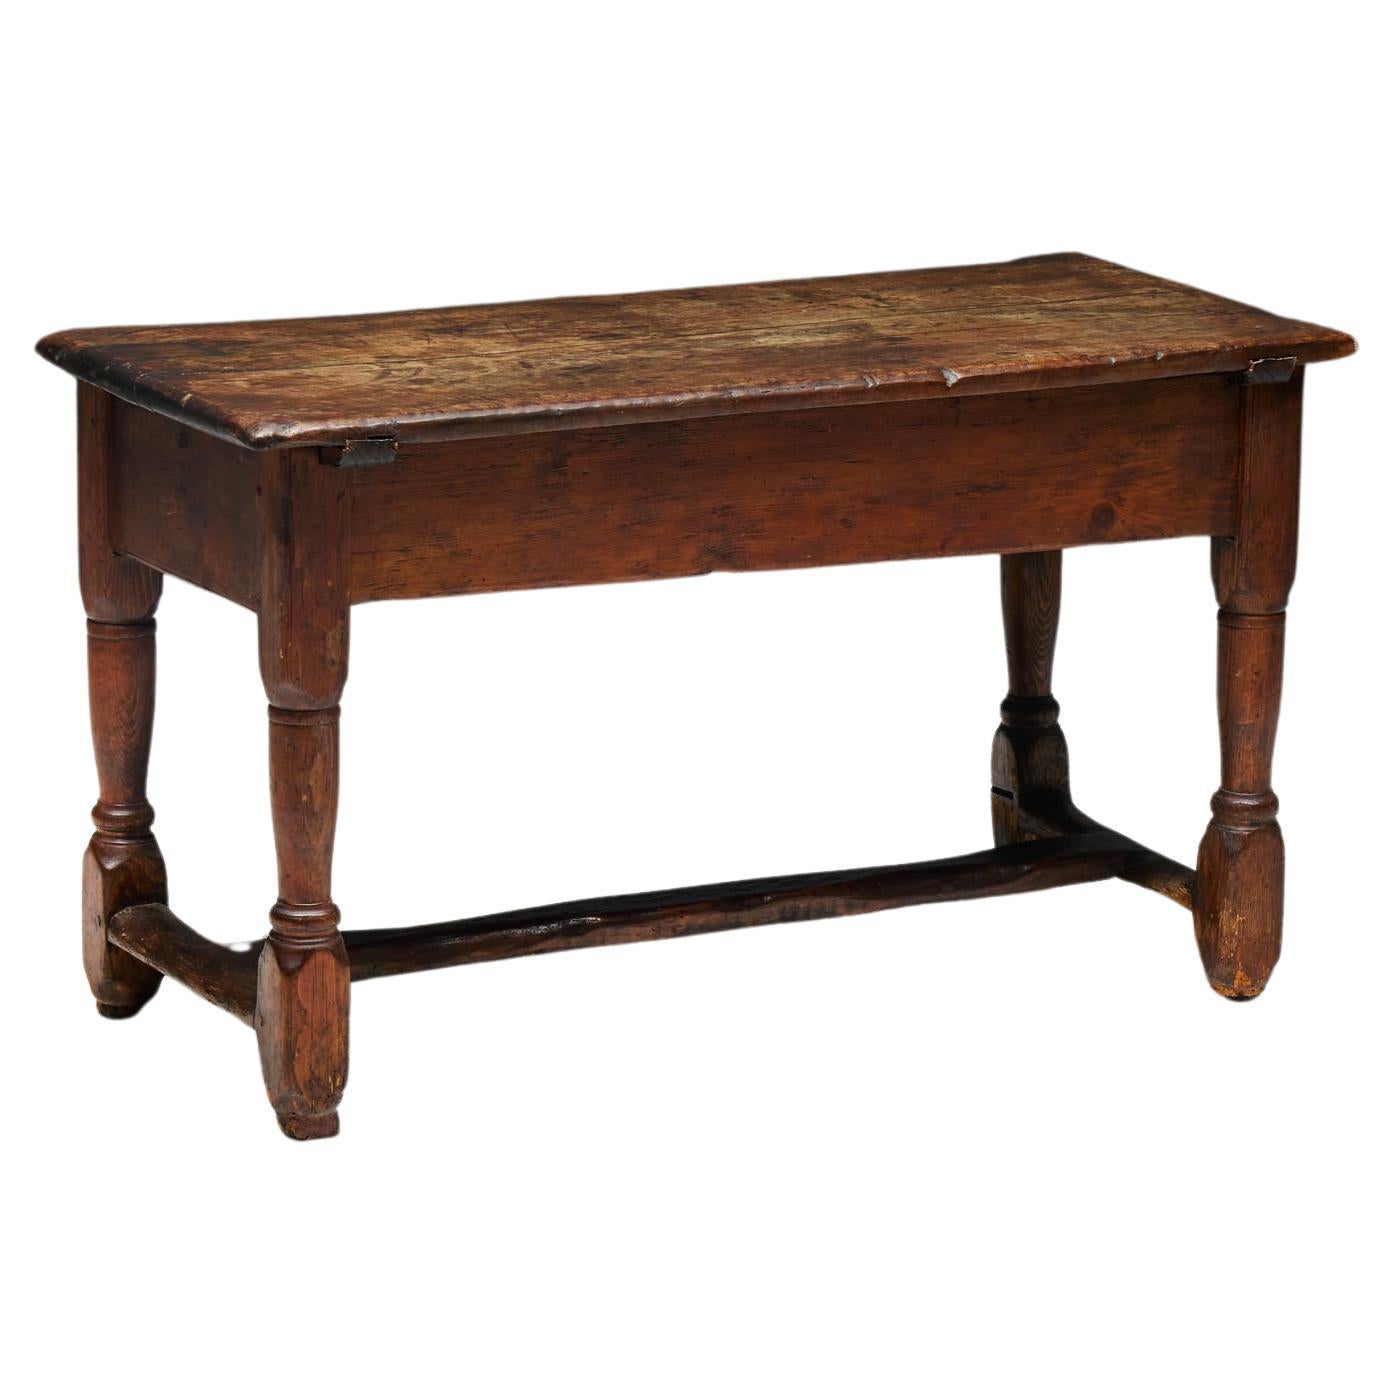 Rustic Art Populaire Writing Table, France, Early 20th Century